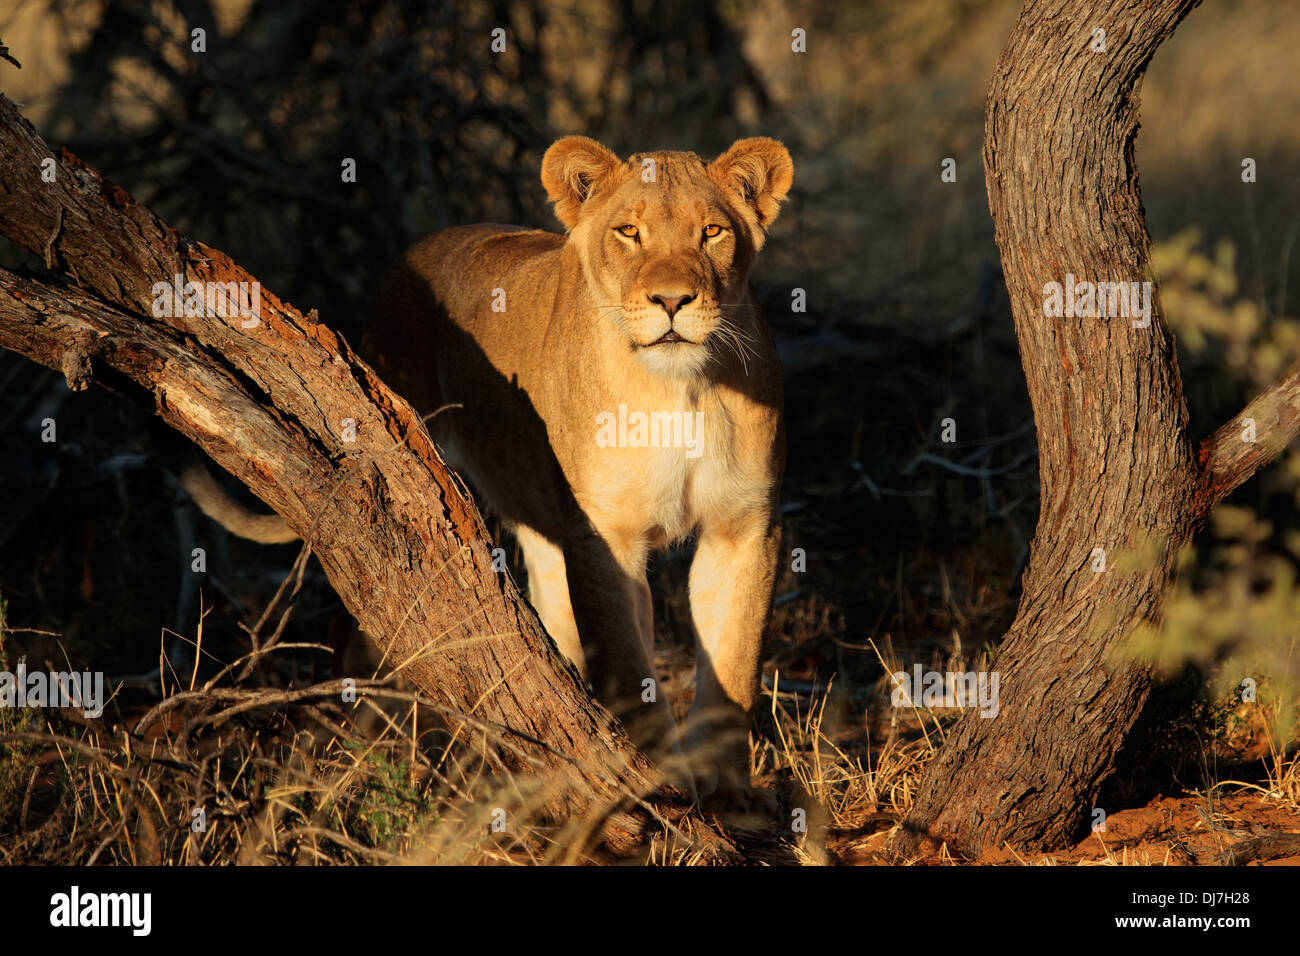 Lioness (Panthera leo) in natural habitat, South Africa Stock Photo